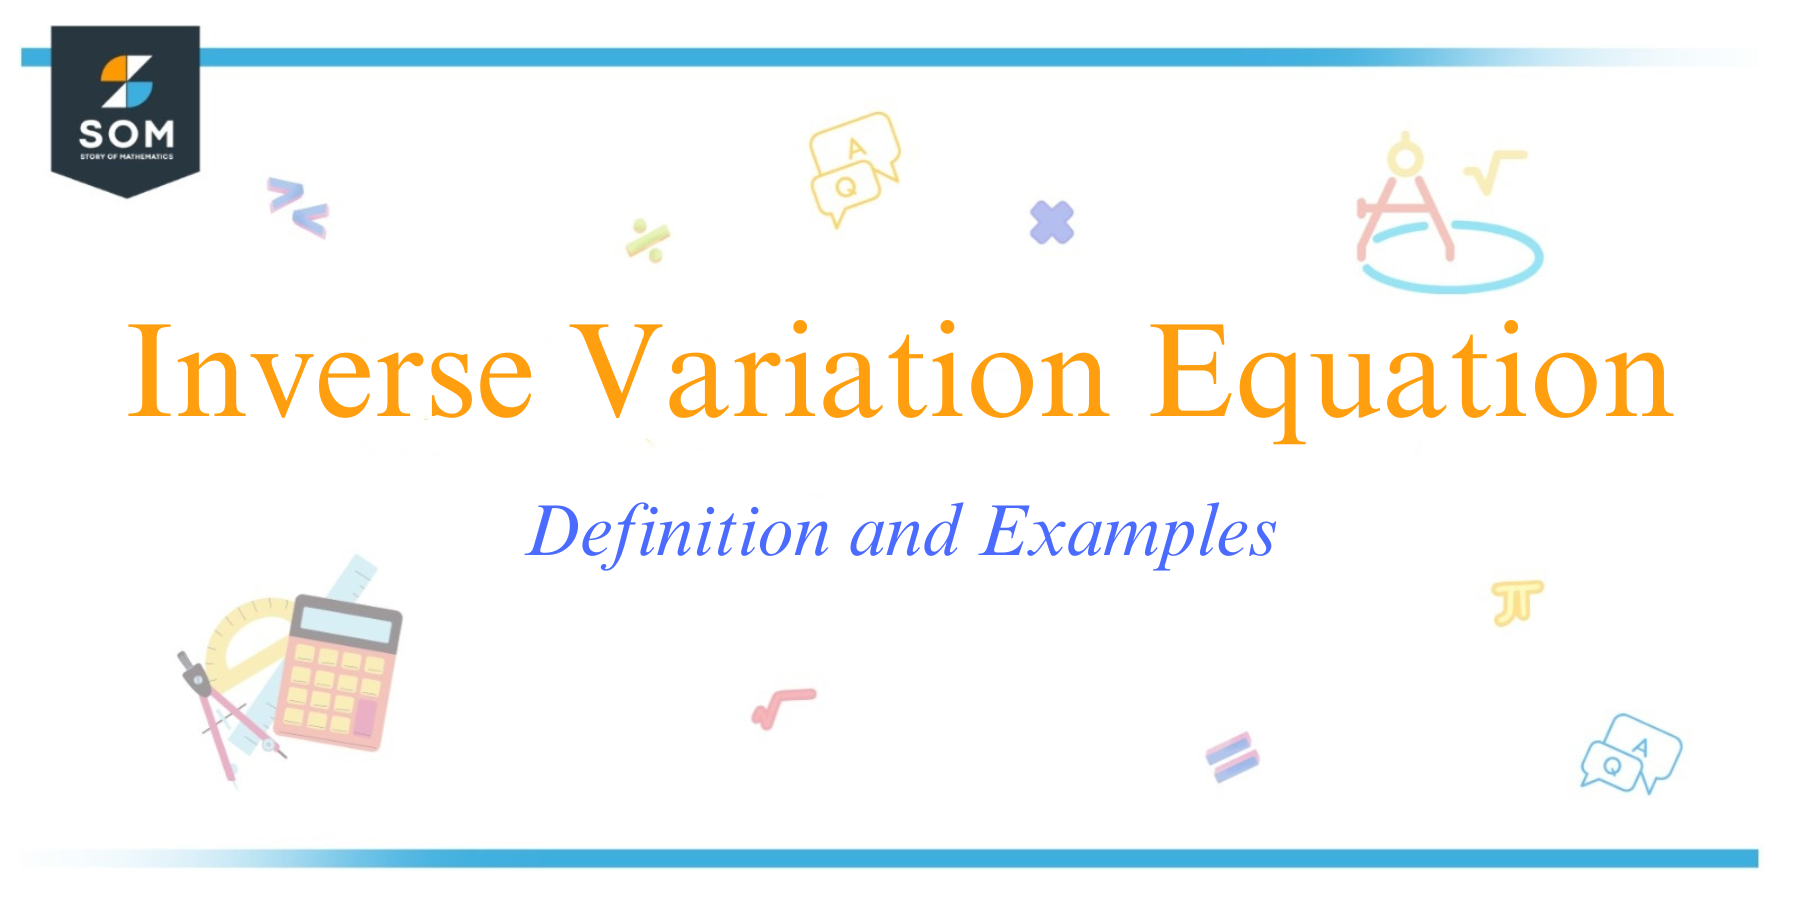 Inverse Variation Equation Definition and Examples 1